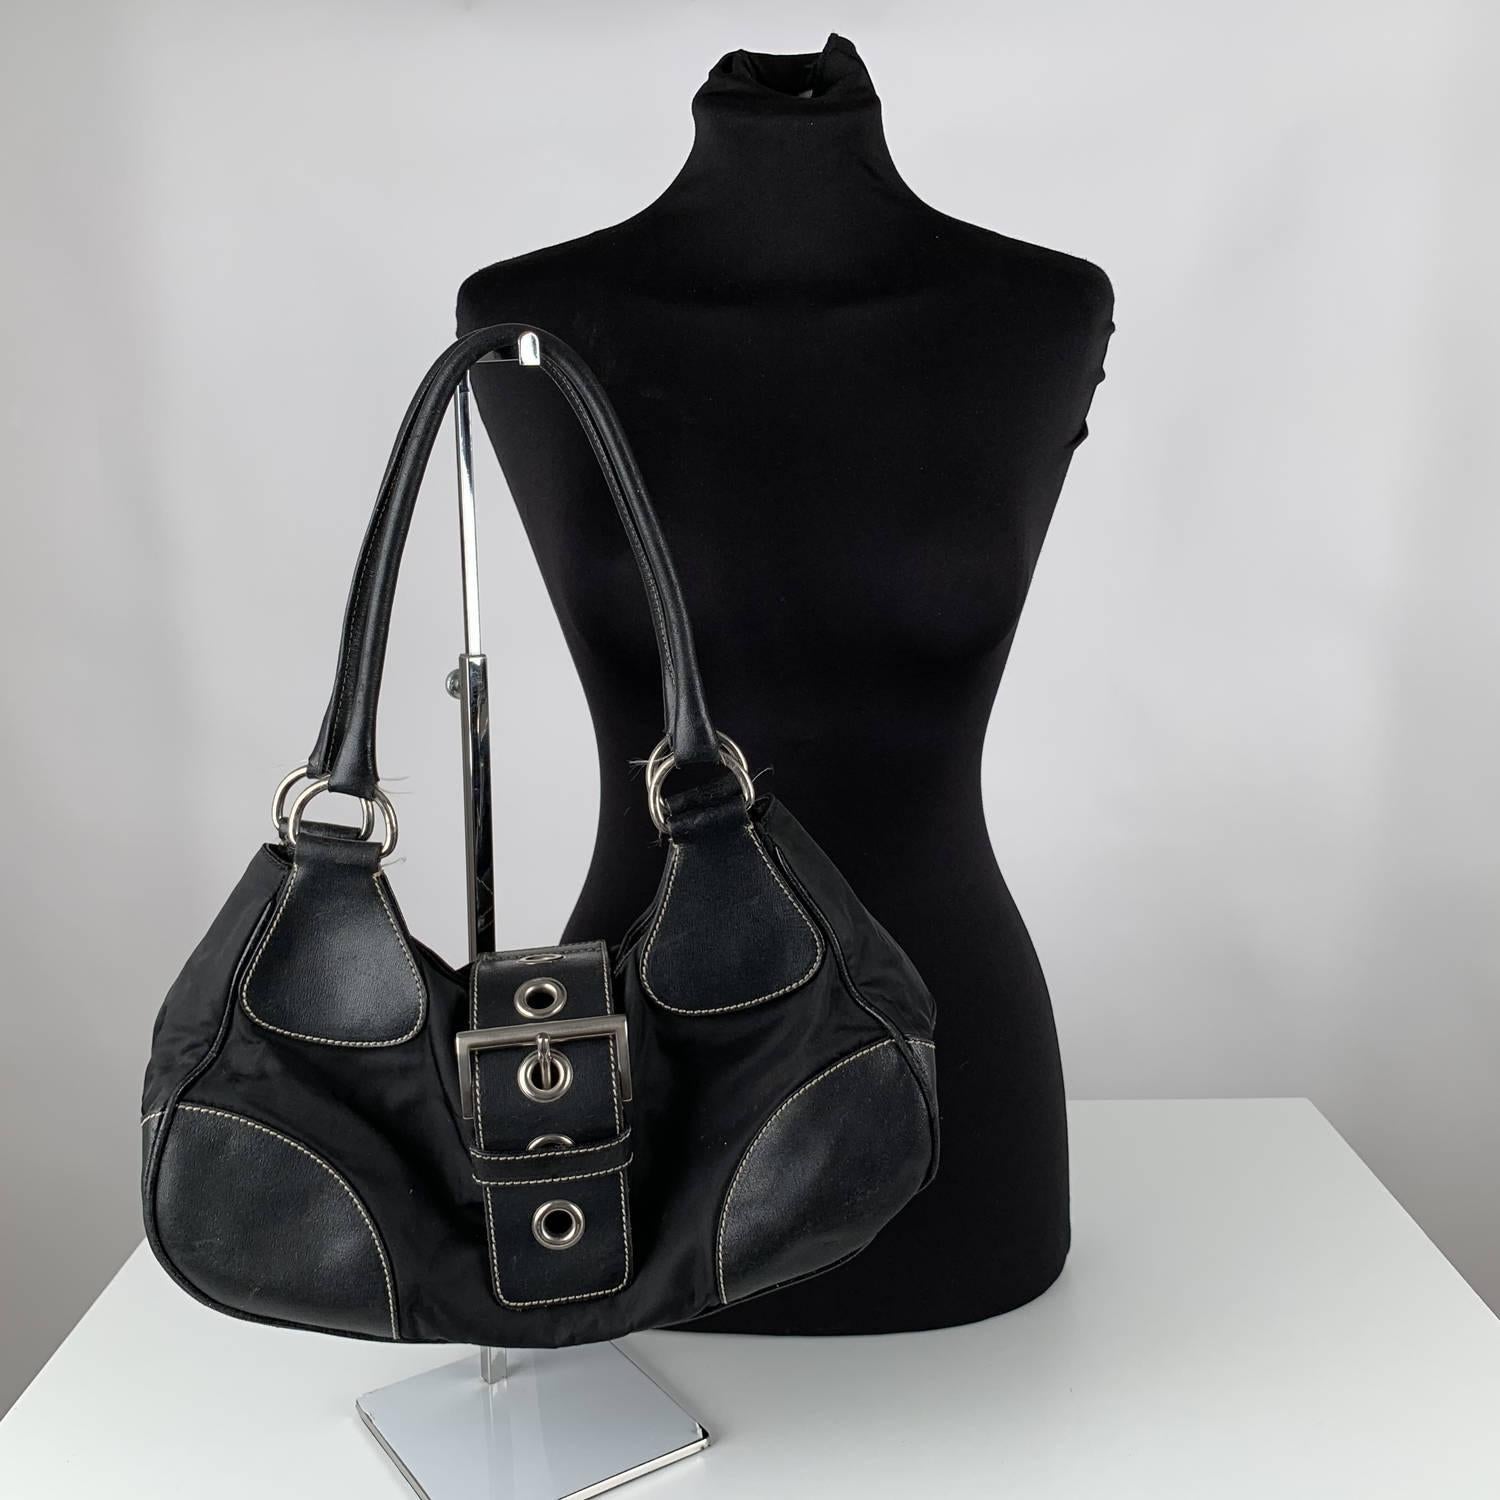 MATERIAL: Canvas COLOR: Black MODEL: Hobo GENDER: Women SIZE: Medium Condition CONDITION DETAILS: B :GOOD CONDITION - Some light wear of use - some scratches on leather trim due to normal use (especially on bottom corners) Measurements MEASUREMENTS: